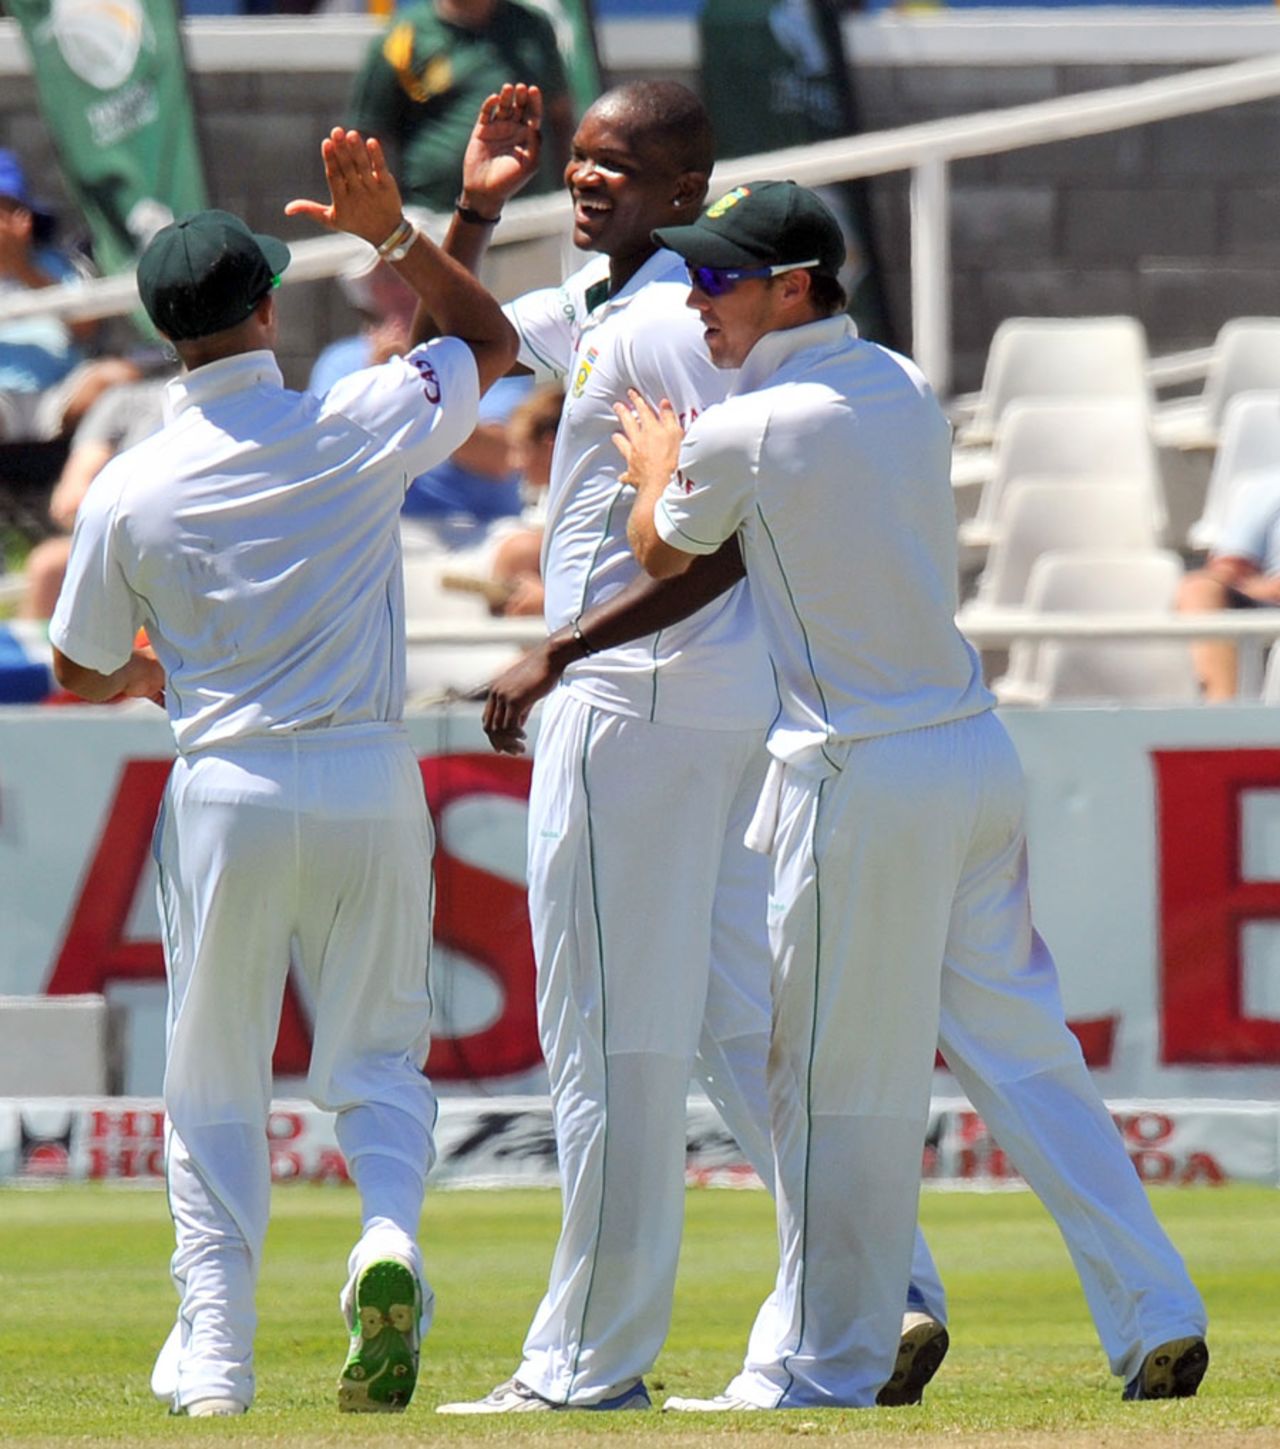 Lonwabo Tsotsobe celebrates the wicket of Rahul Dravid, South Africa v India, 3rd Test, Cape Town, 5th day, January 6, 2011